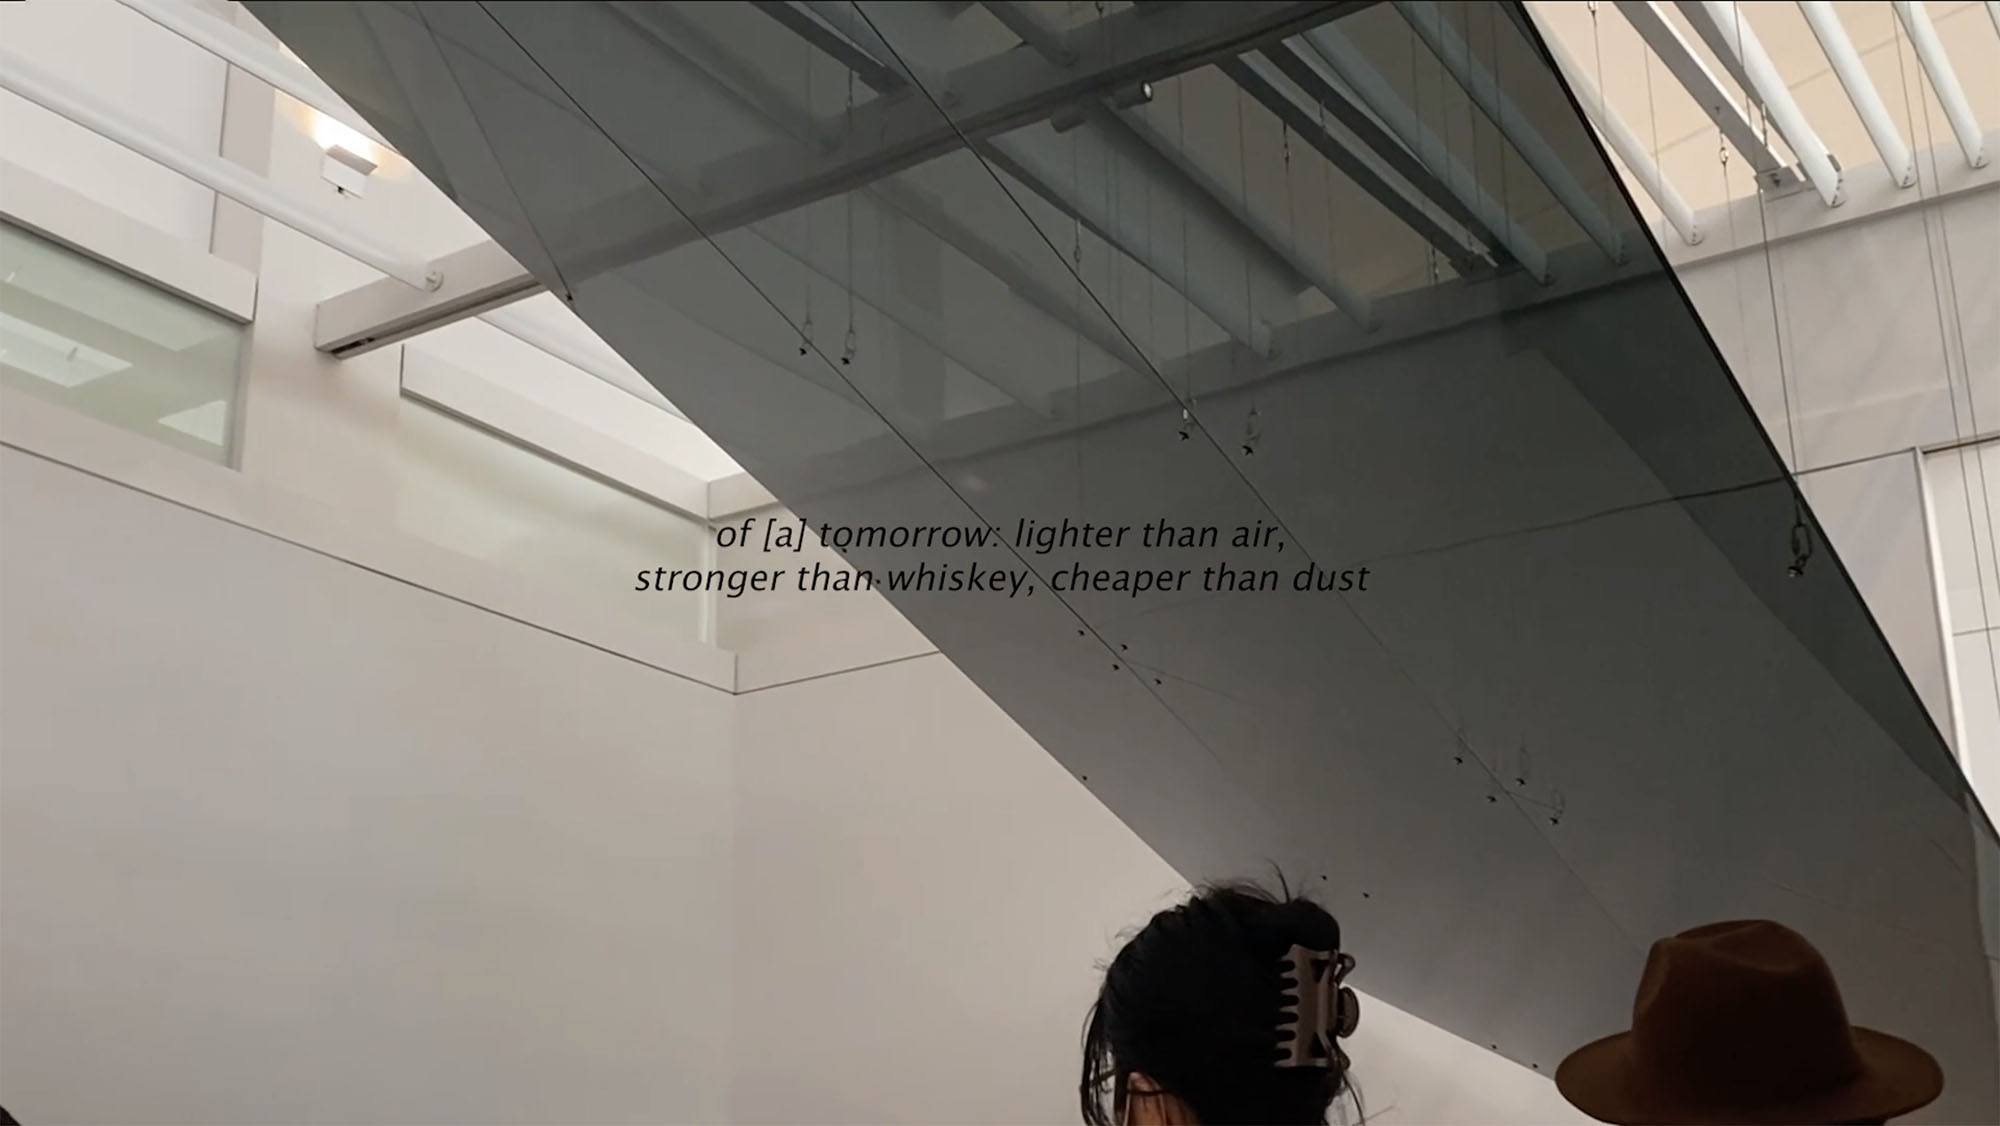 An installation image with text that says "of a tomorrow: lighter than air, stronger than whiskey, cheaper than dust"